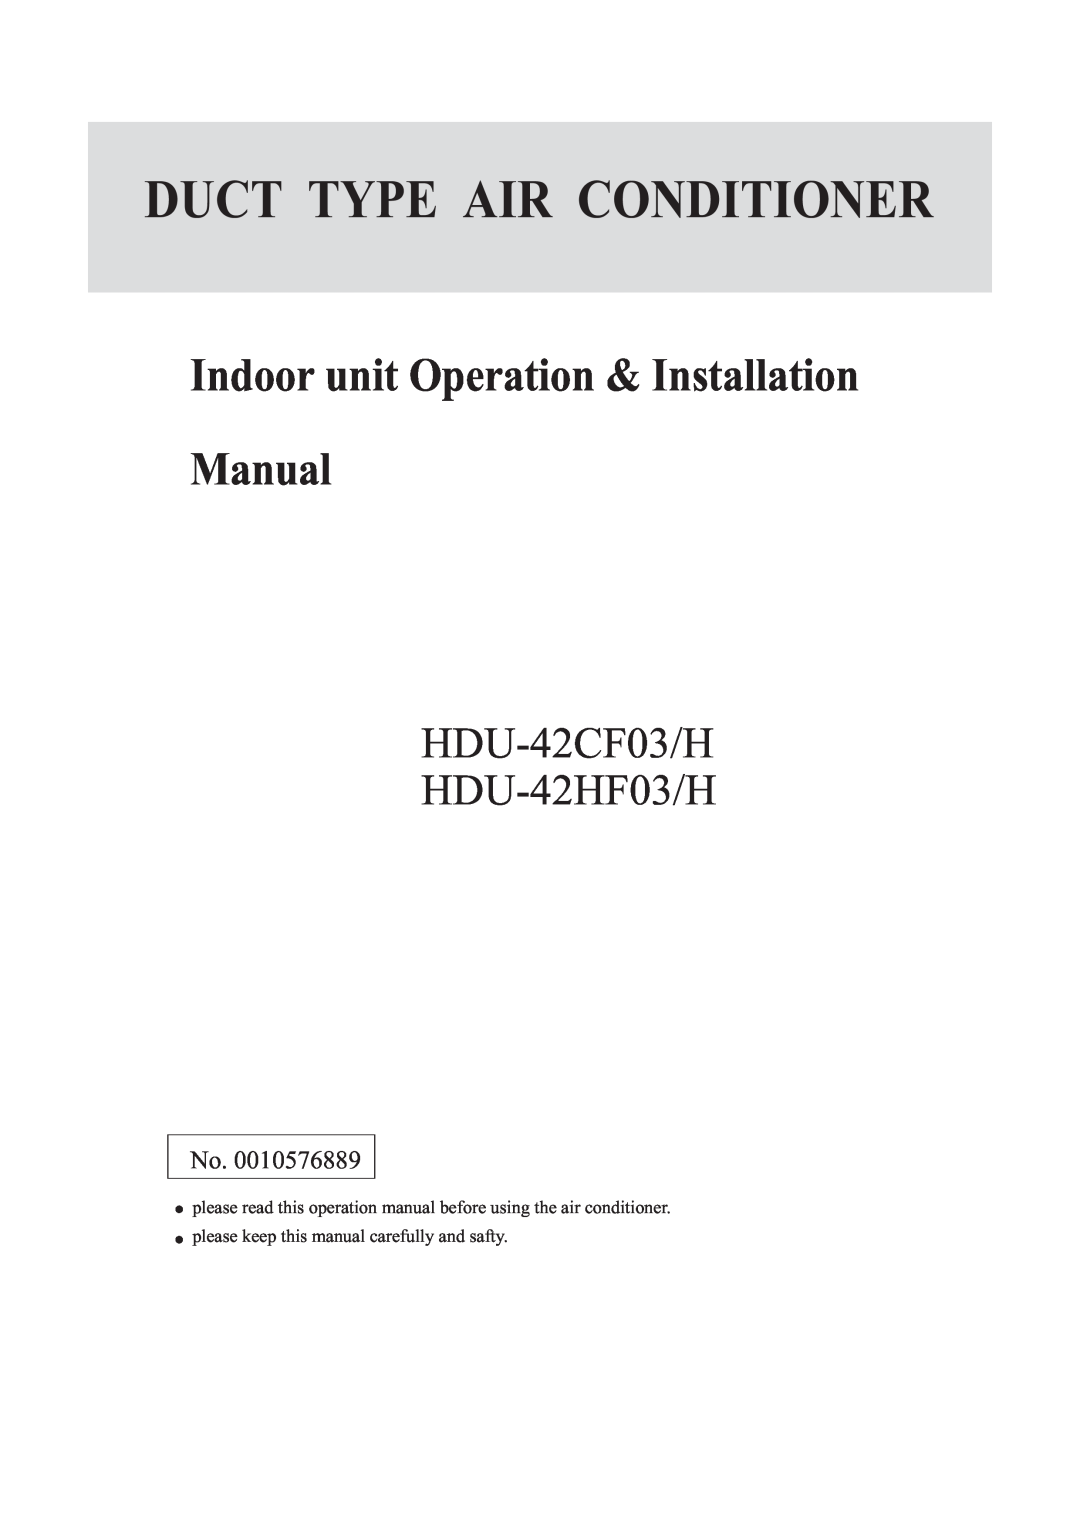 Haier HDU-42HF03/H installation manual Duct Type Air Conditioner, Indoor unit Operation & Installation Manual 